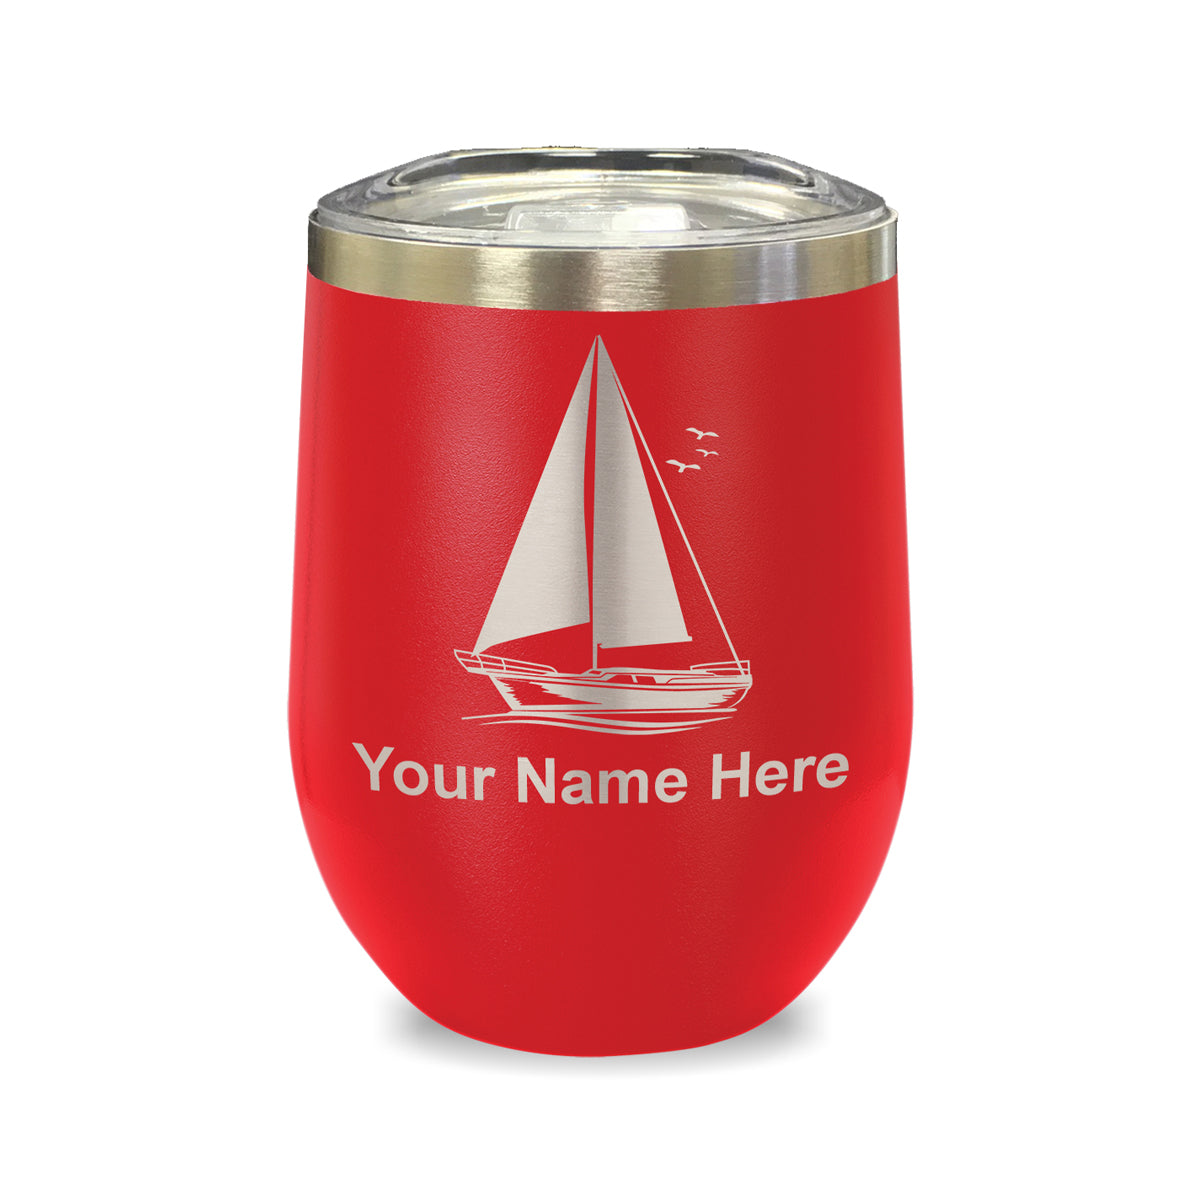 LaserGram Double Wall Stainless Steel Wine Glass, Sailboat, Personalized Engraving Included